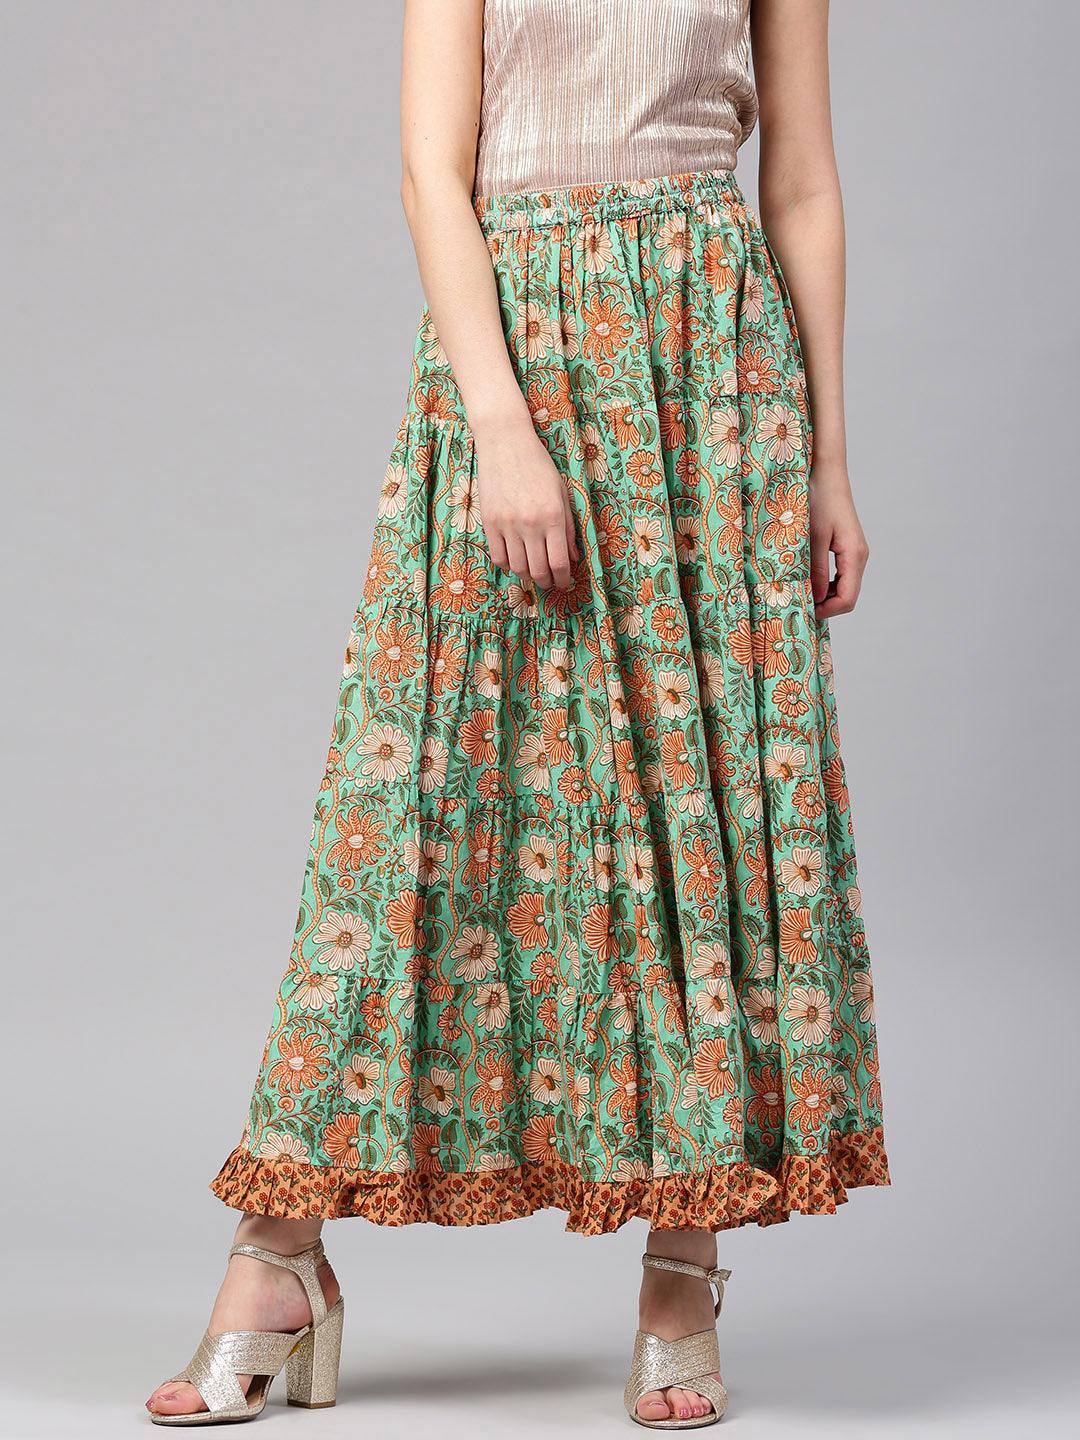 Green Floral Pastel Printed Flared Skirt With Frill Hemline - Znxclothing